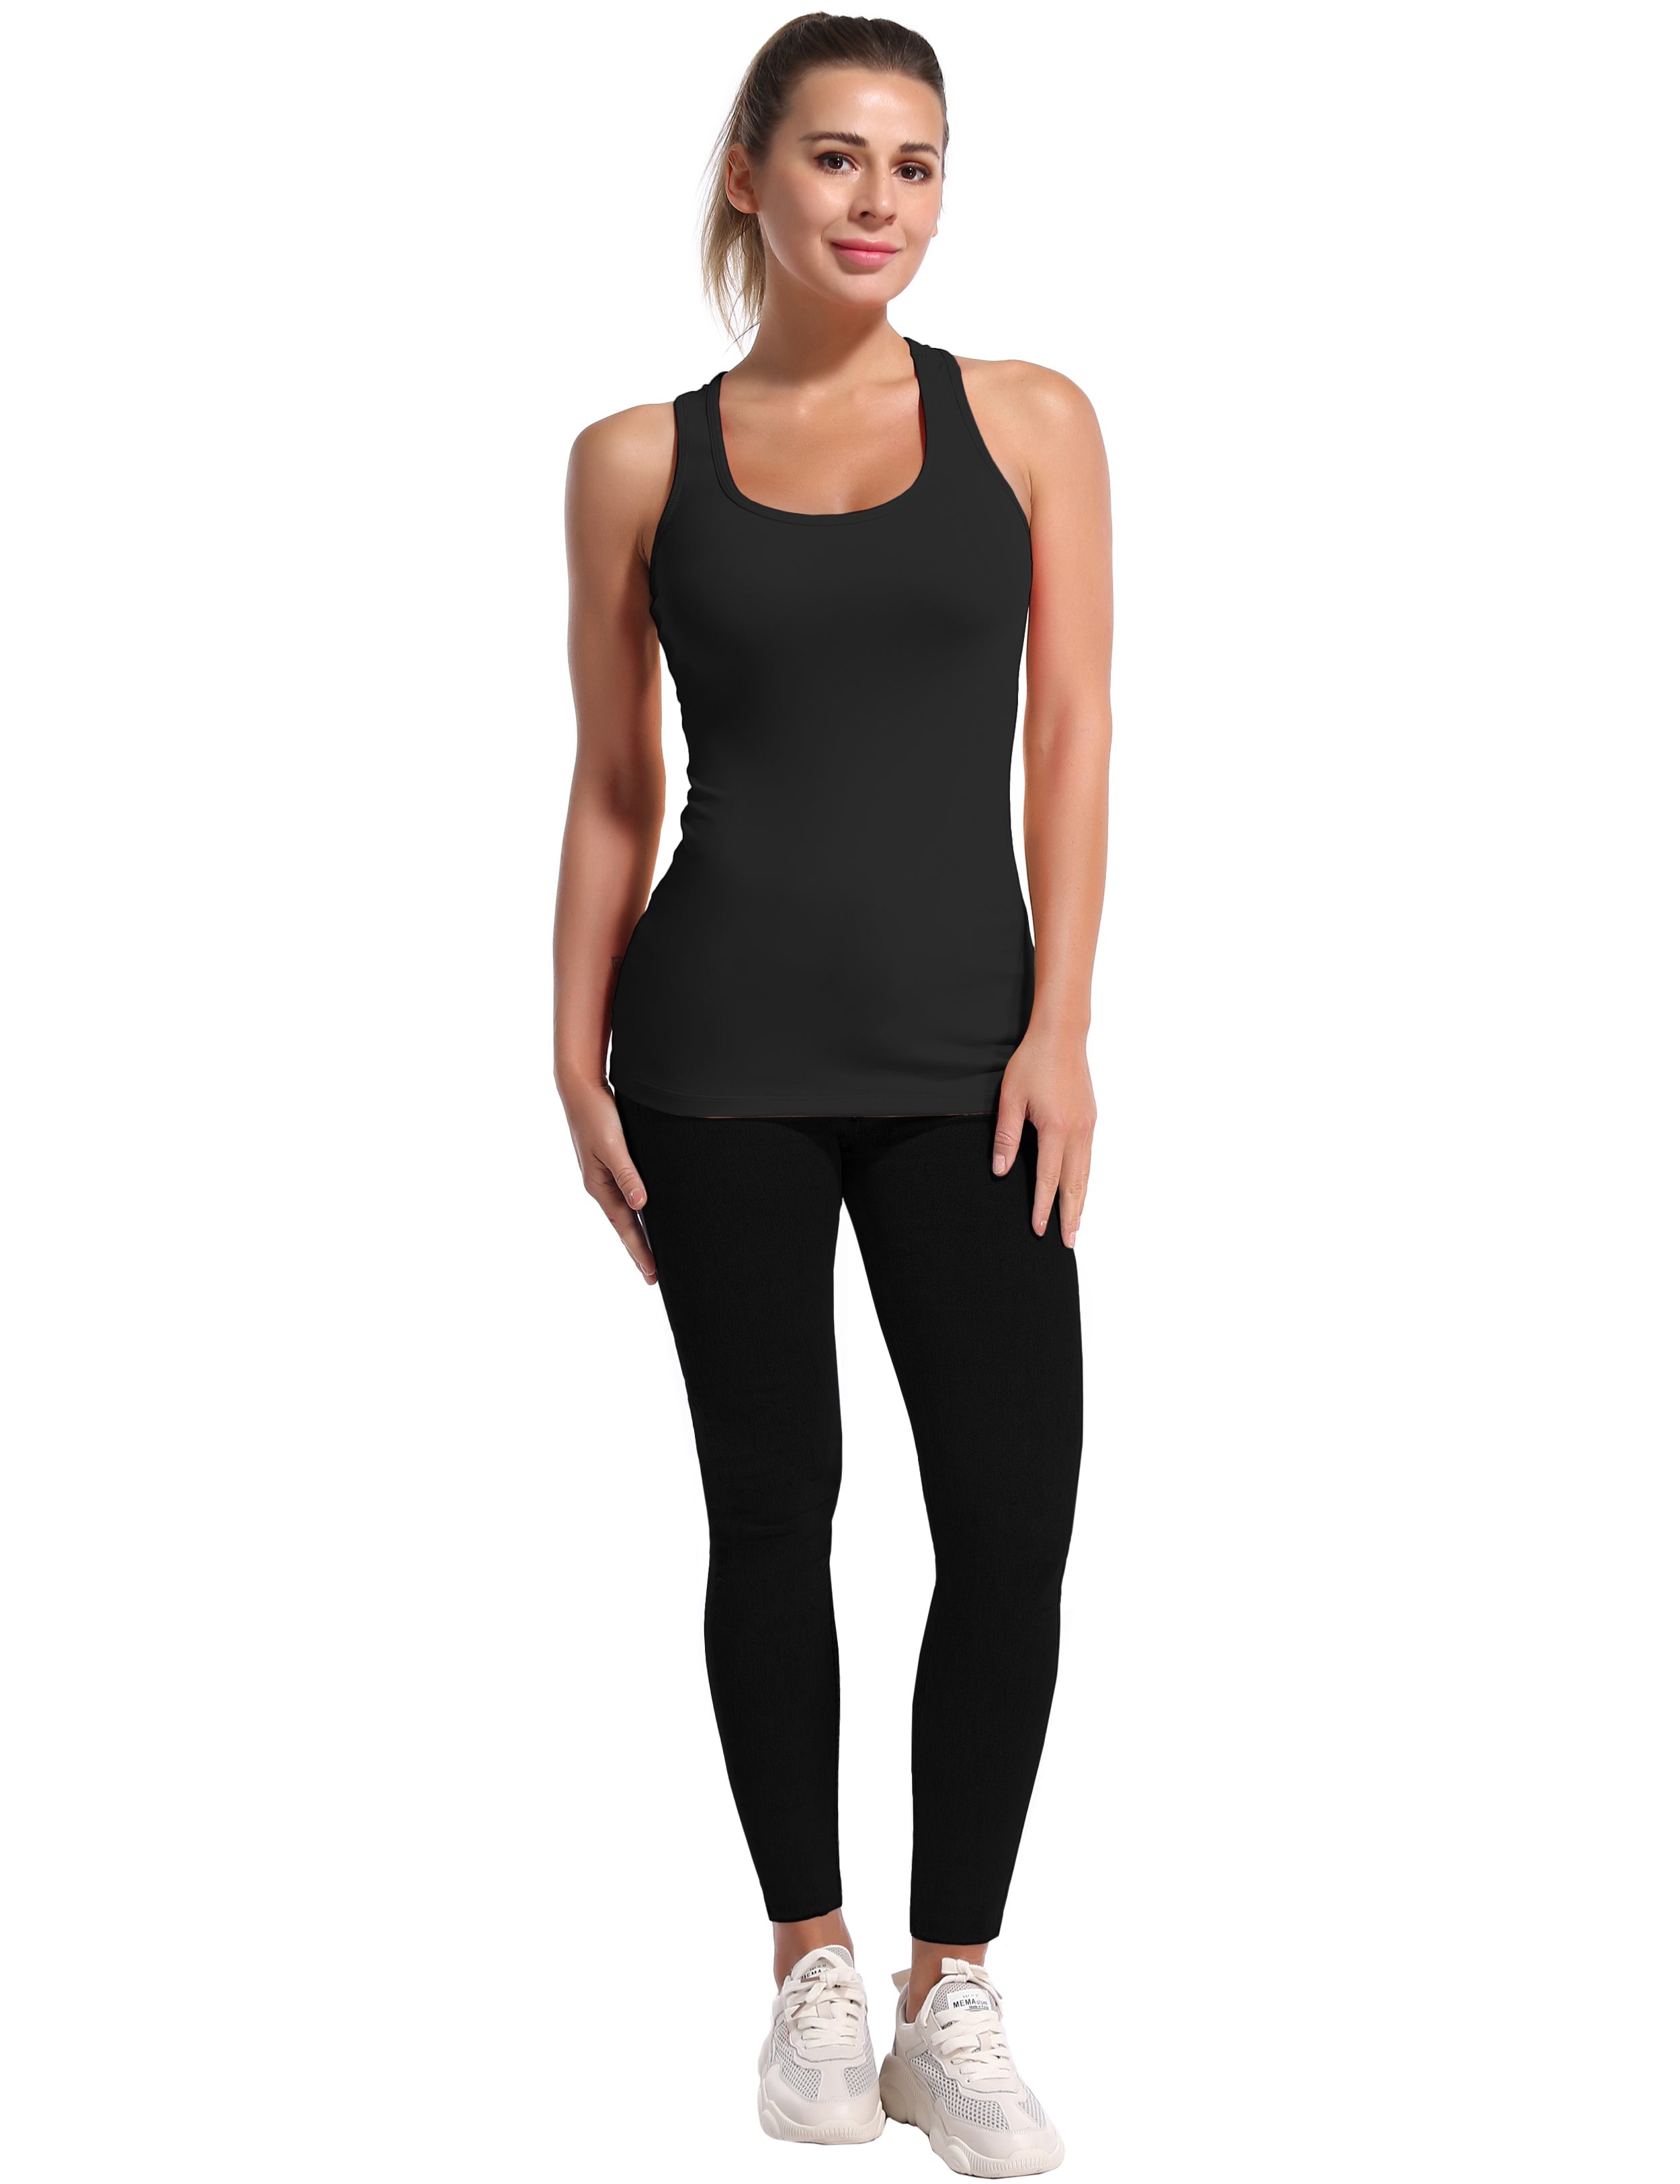 Racerback Athletic Tank Tops black 92%Nylon/8%Spandex(Cotton Soft) Designed for Golf Tight Fit So buttery soft, it feels weightless Sweat-wicking Four-way stretch Breathable Contours your body Sits below the waistband for moderate, everyday coverage